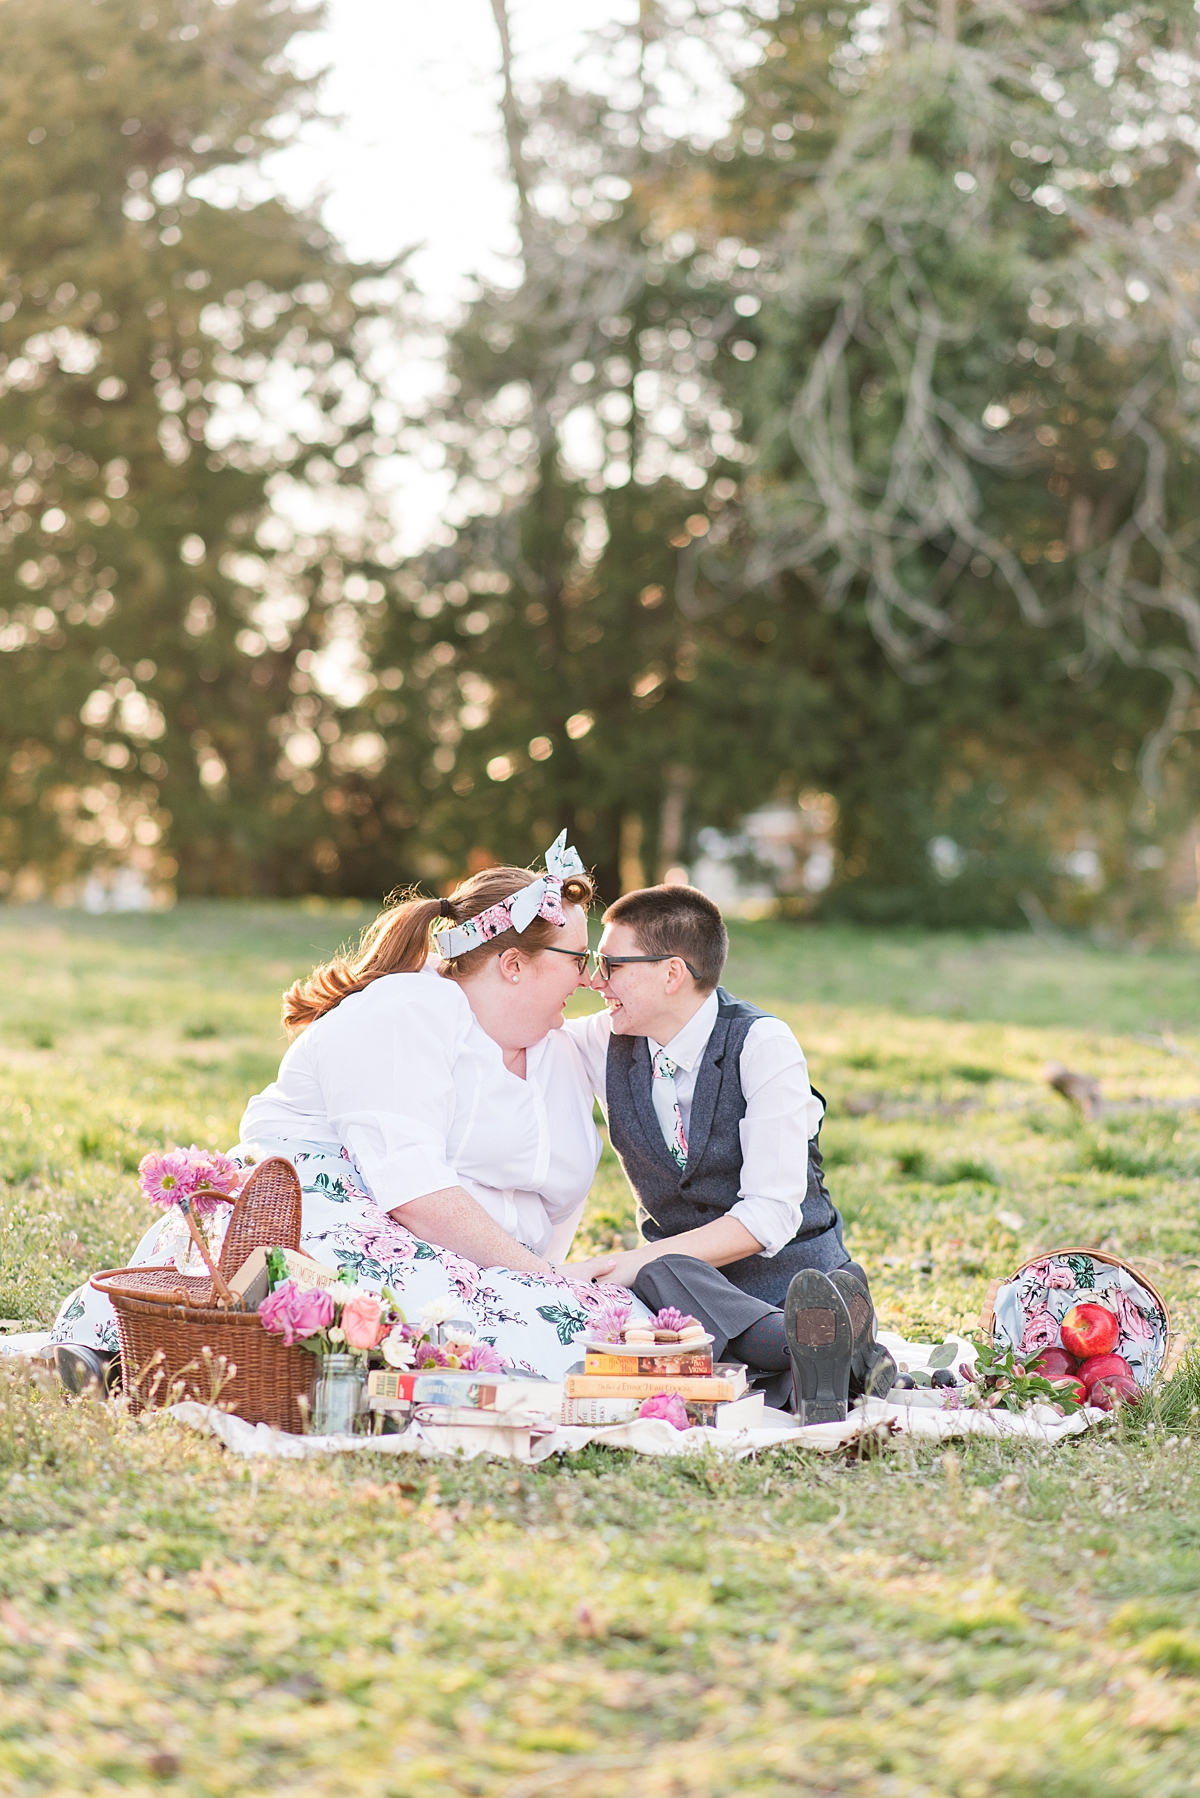 1950's Styled Engagement Session Picnic in Virginia Beach by Charlottesville Wedding Photographer, Kailey Brianne Photography. 